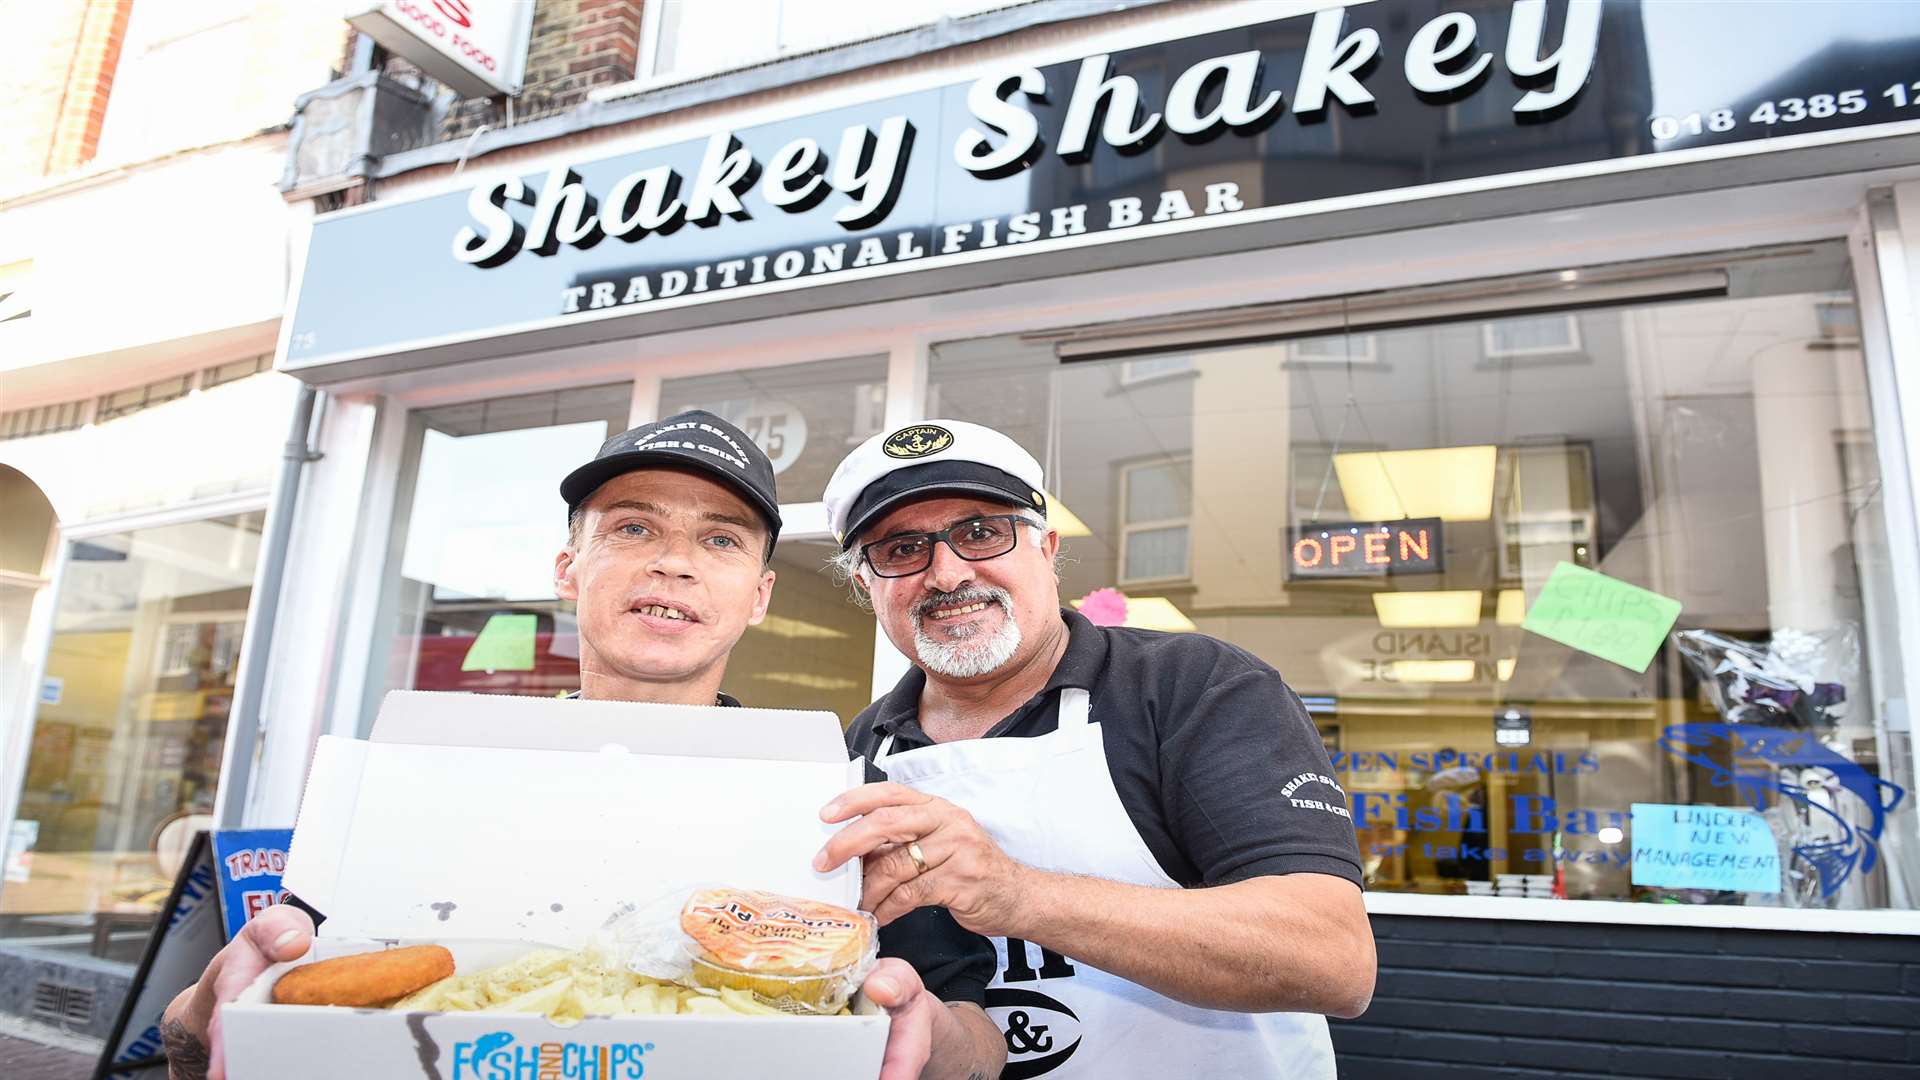 Shakey Shakey fish bar, which was evacuated tonight, offers vegan and gluten-free food. Picture: Alan Langley